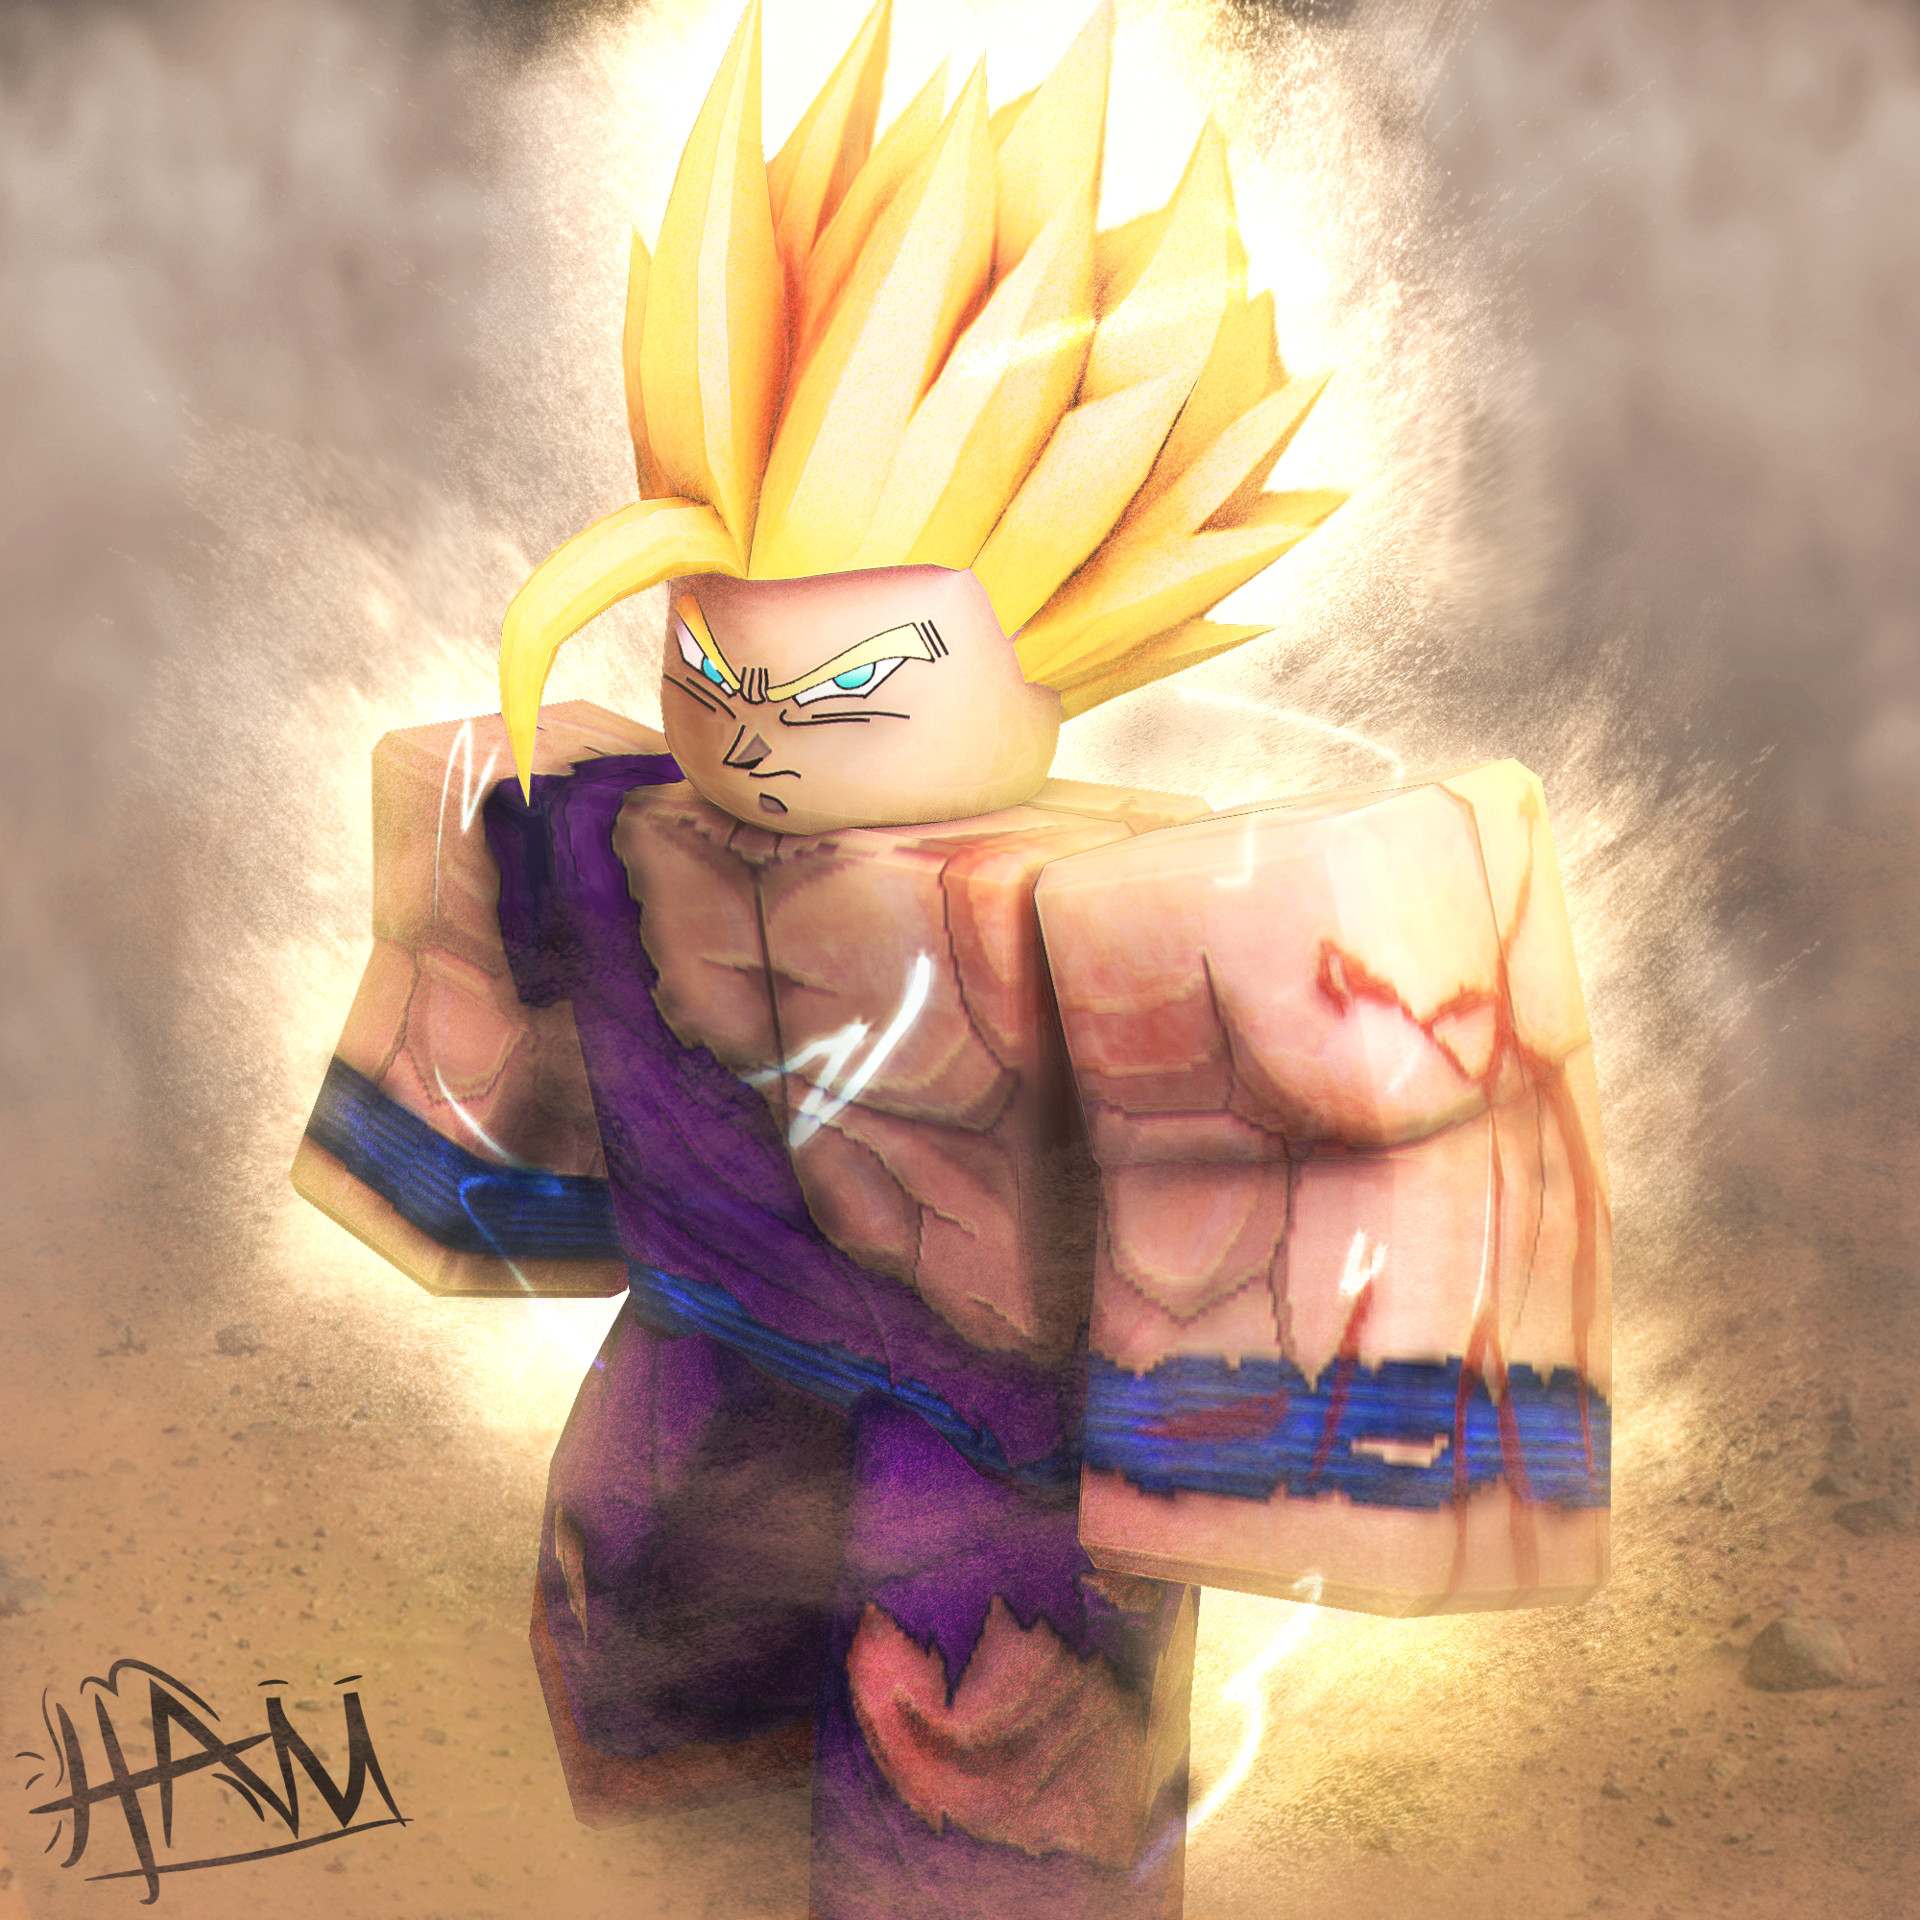 I Became Final Form Gohan In This NEW Dragon Ball Roblox Update! 